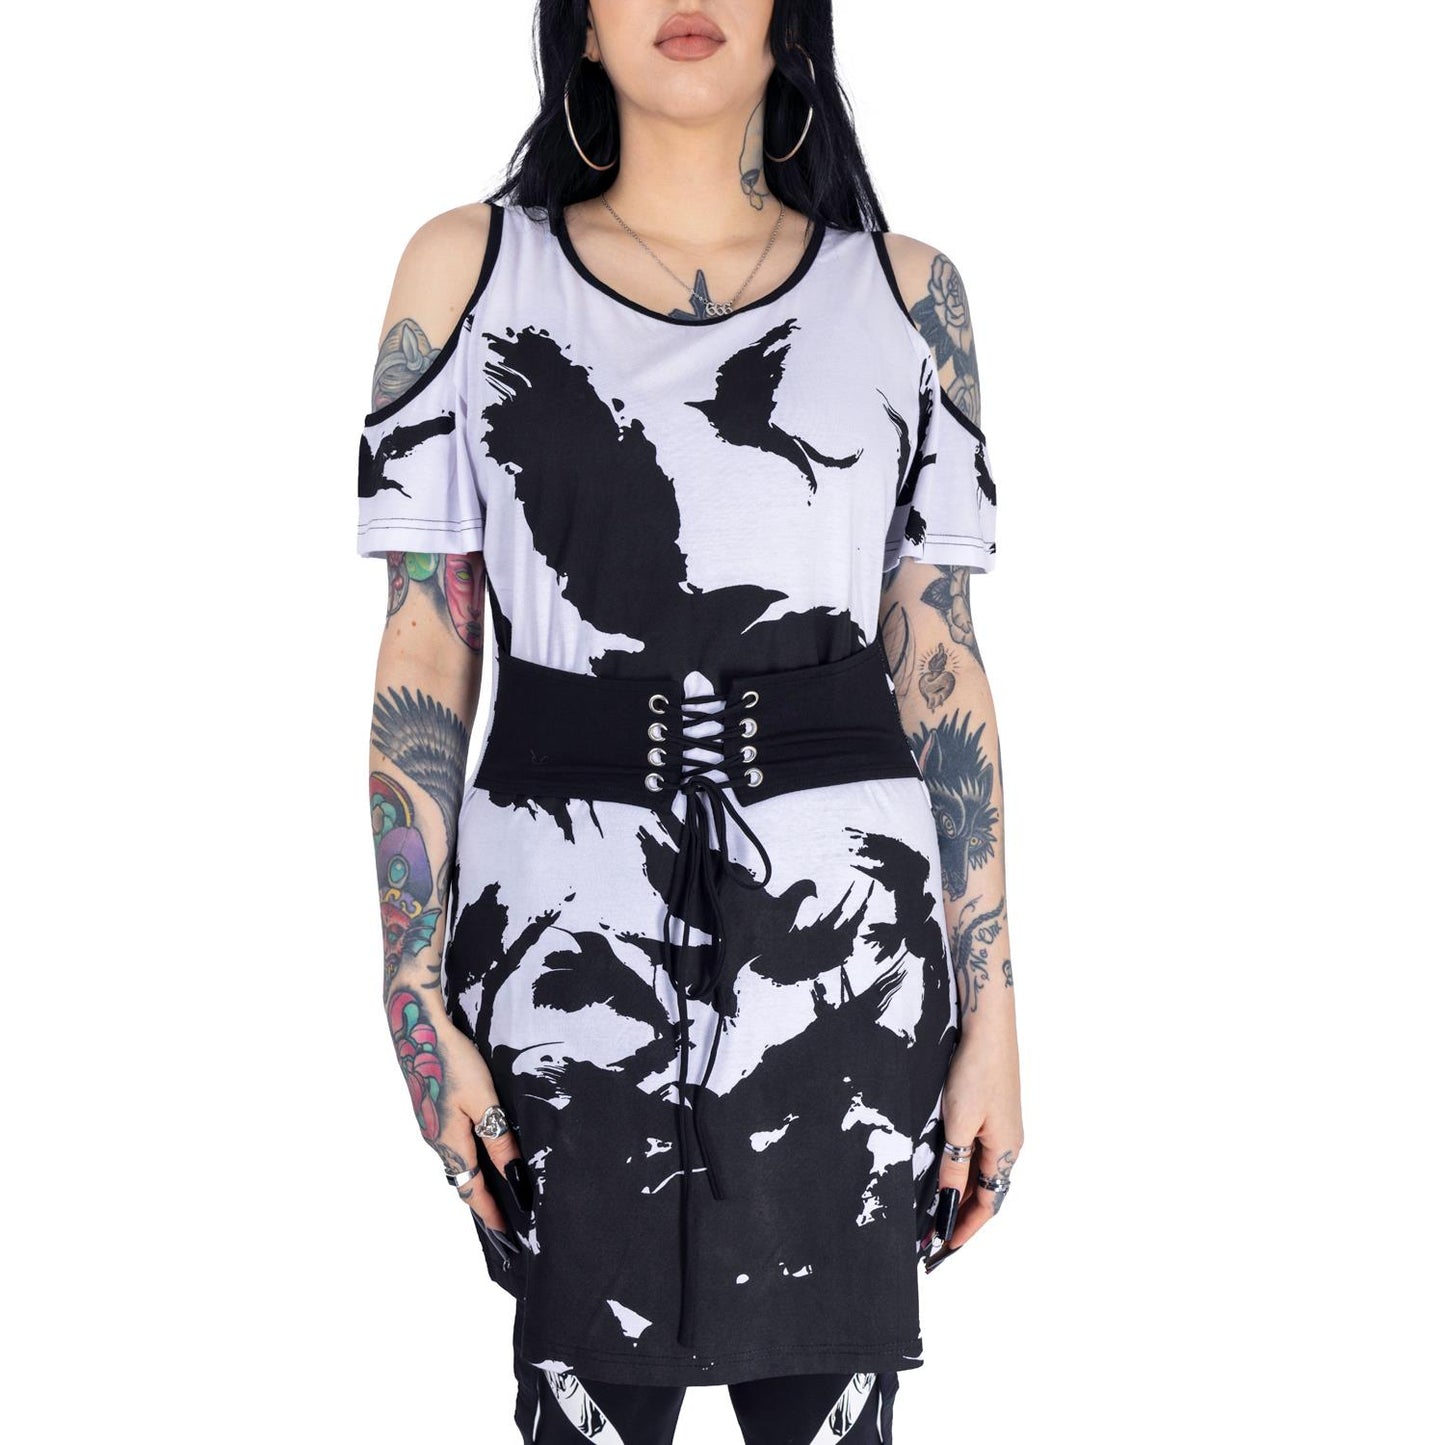 NIGHT OF THE CROW TOP - WHITE/BLACK